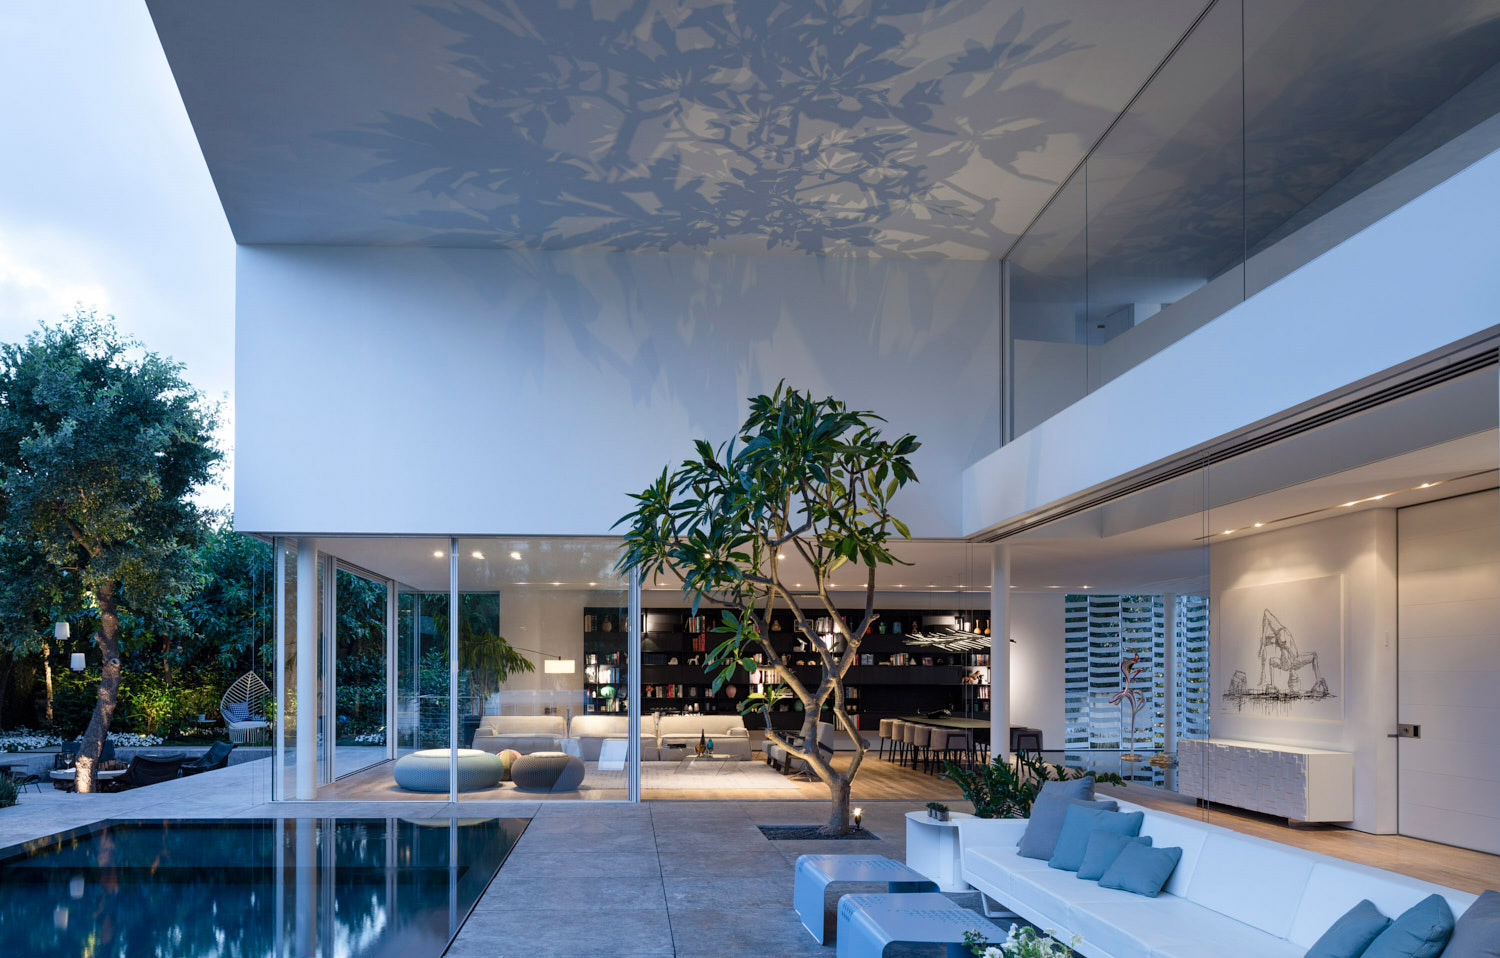 A Most Extraordinary Home - Patio & pool area